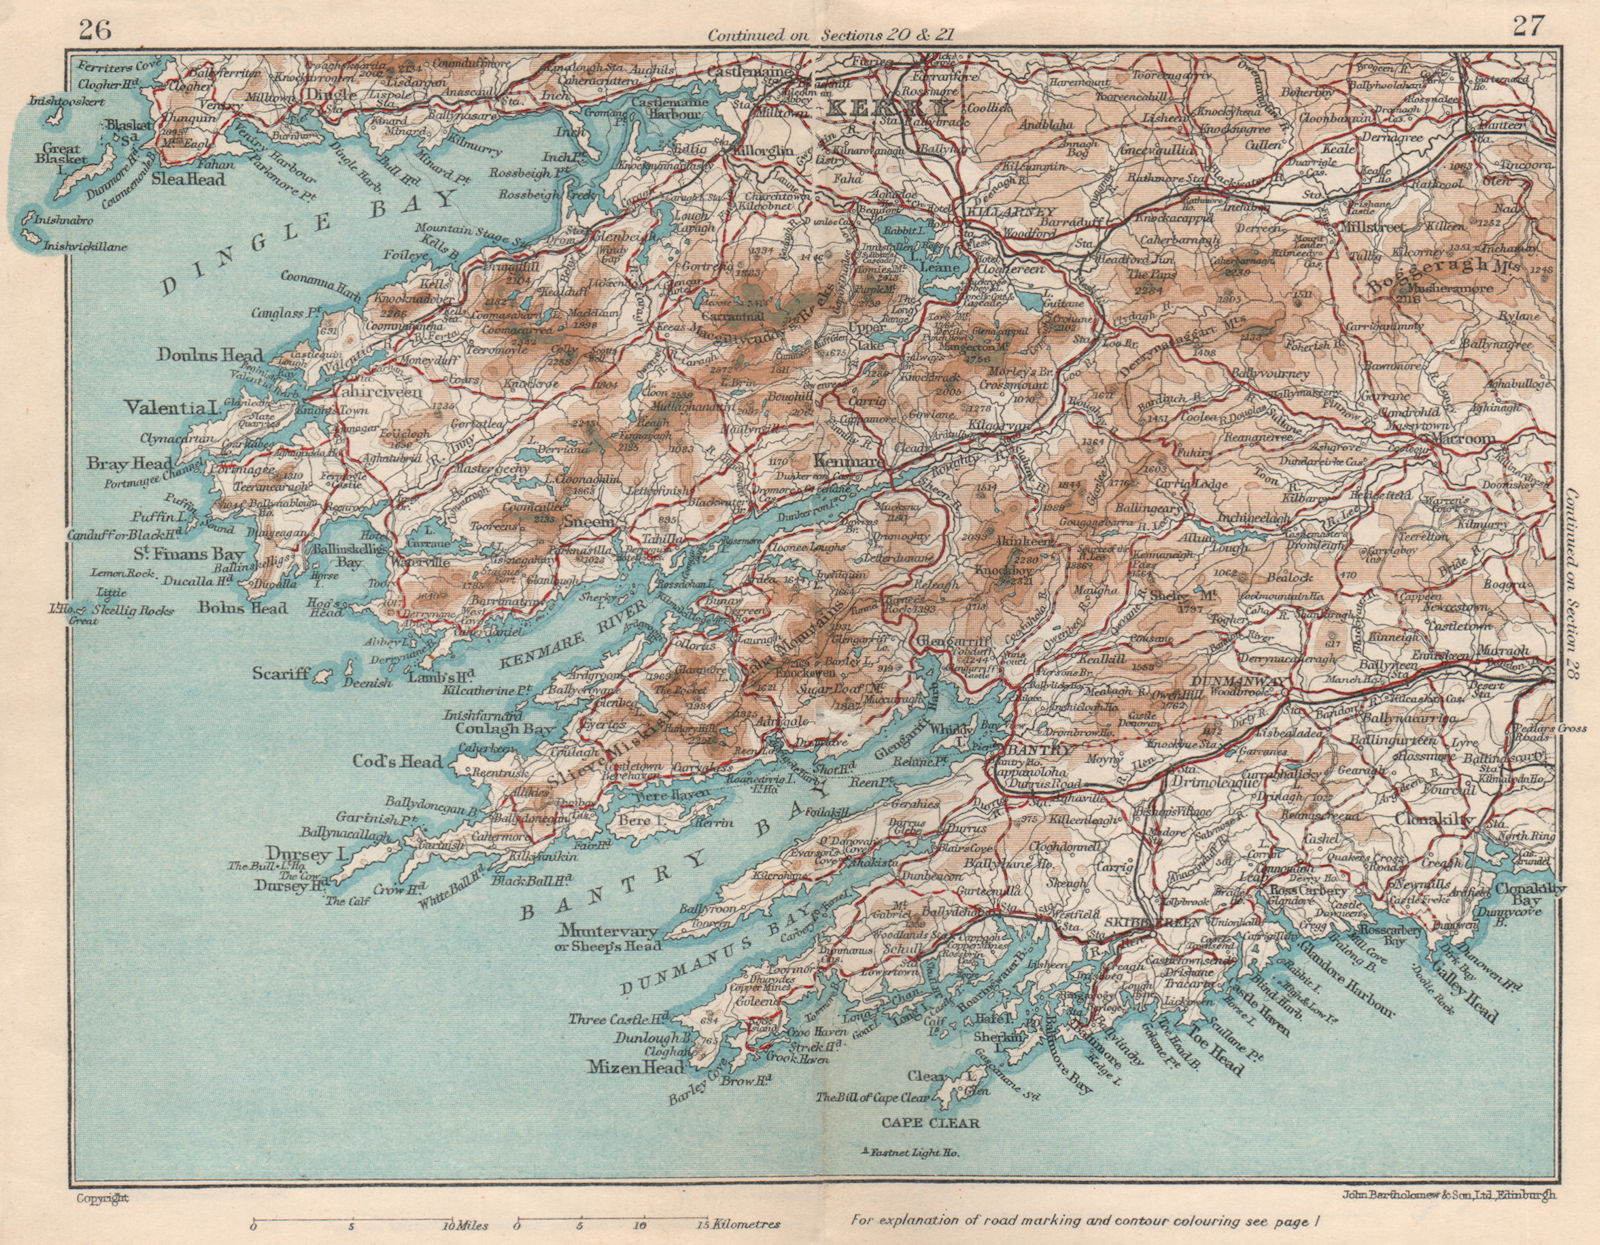 SOUTH WEST IRELAND.Munster Kerry Cork.Dingle/Bantry Bays.Kenmare River 1949 map